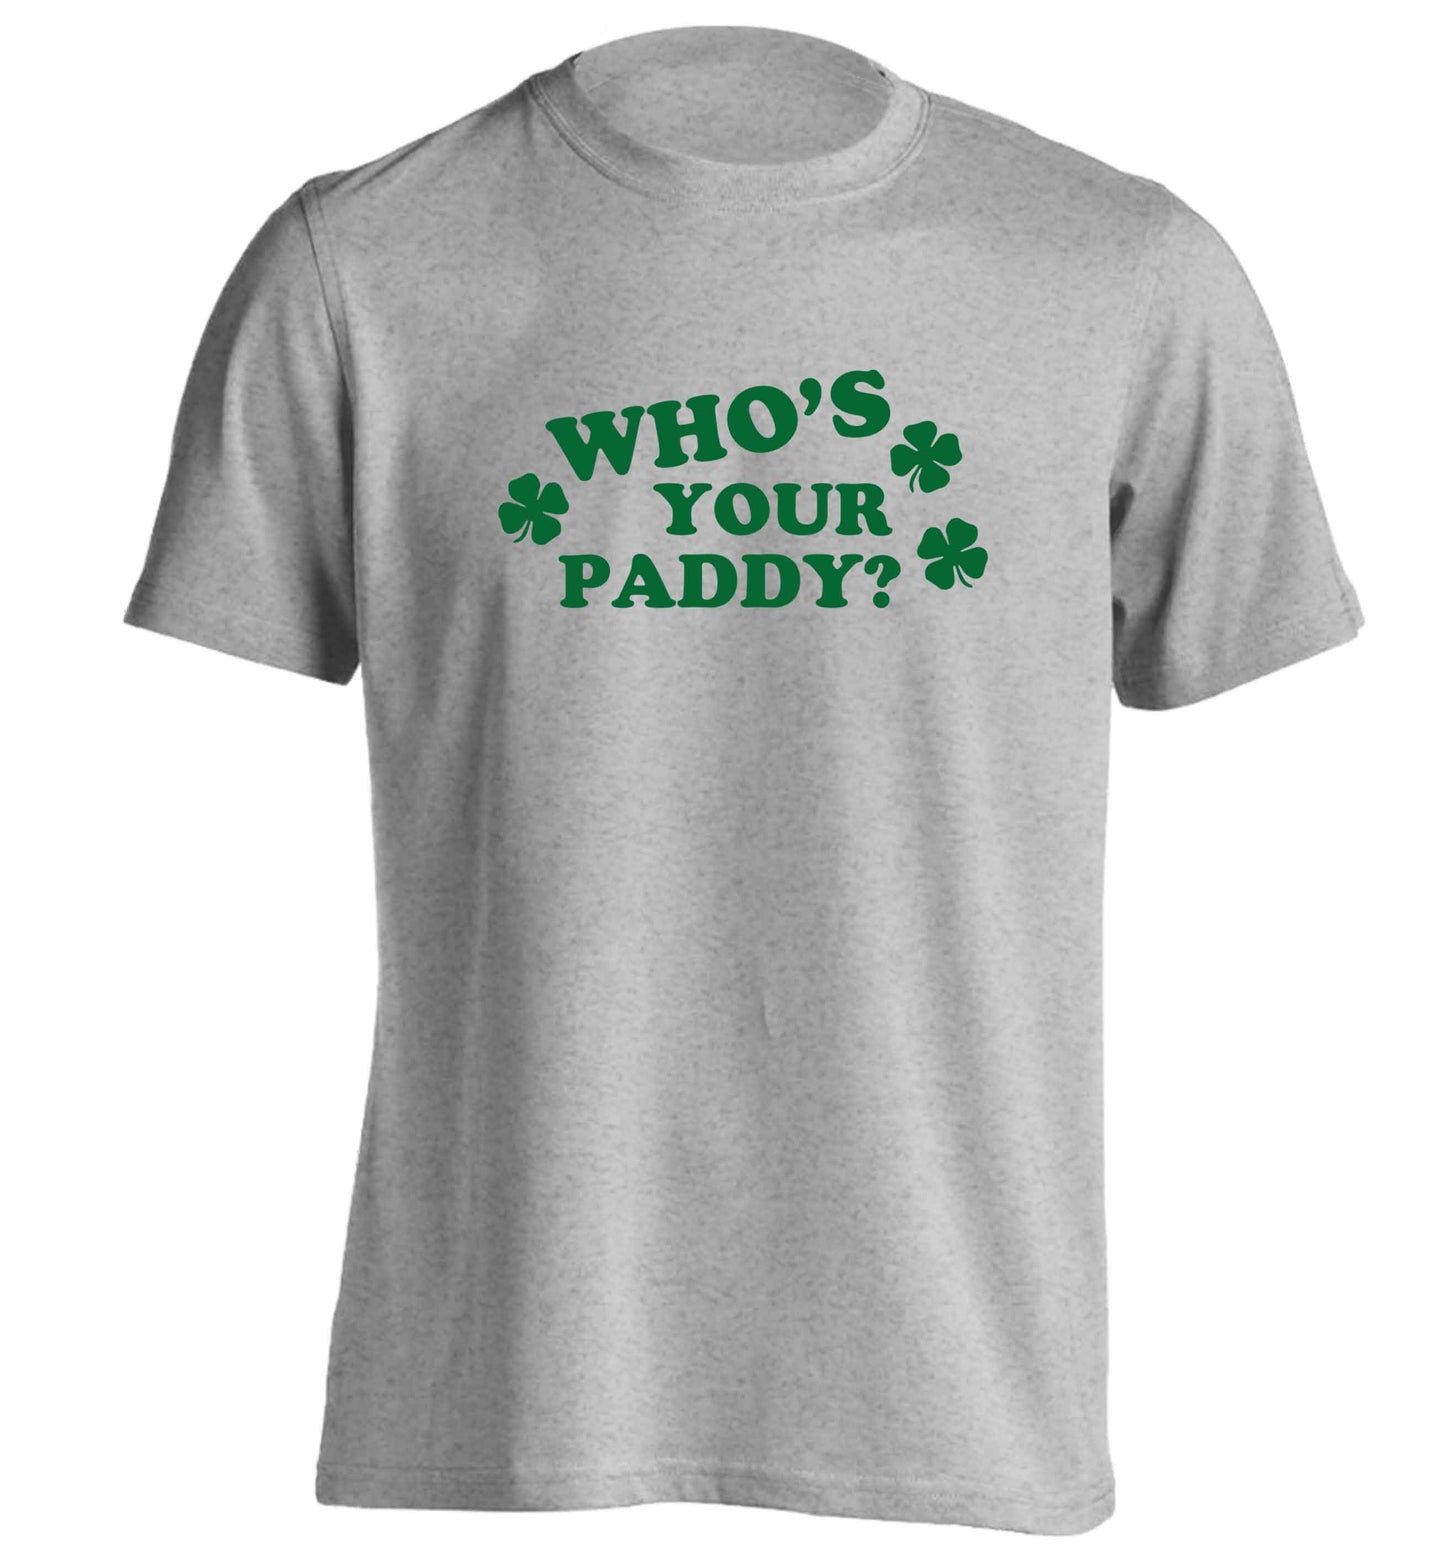 Who's your paddy? adults unisex grey Tshirt 2XL